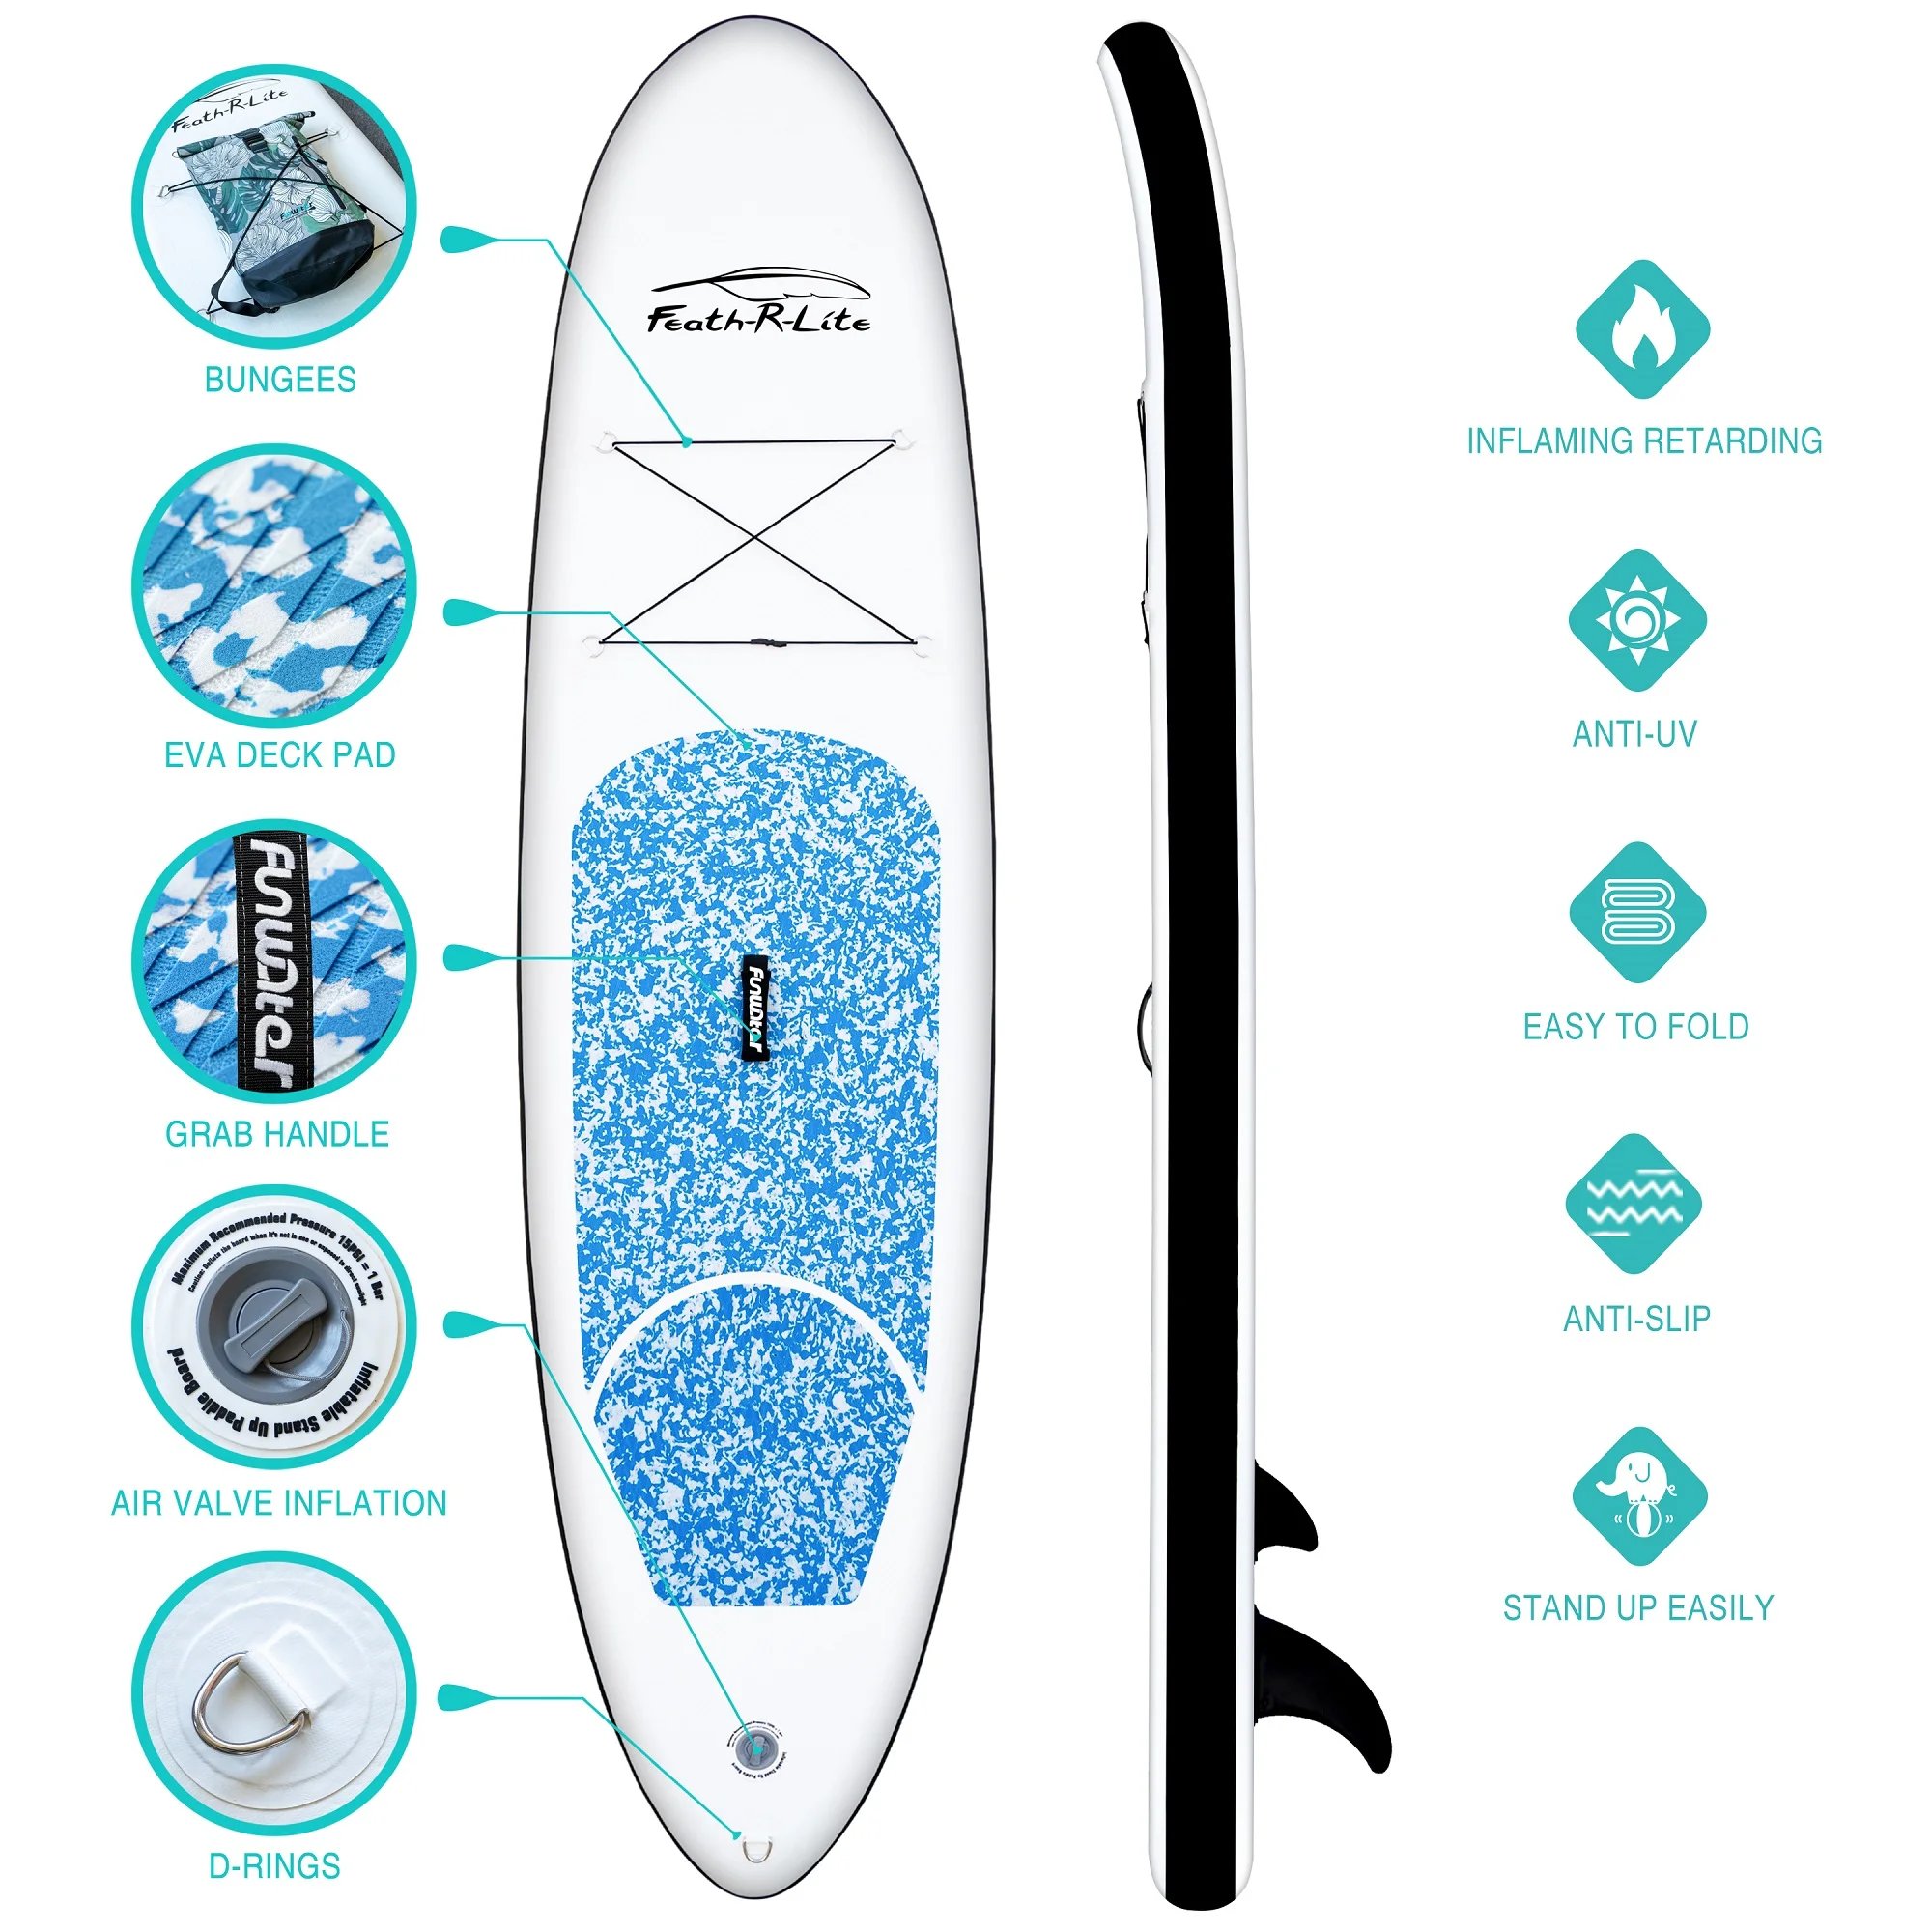 Feath r lite. Сапборд Feath-r-Lite. Sup Board Feath-r-Lite. Сапборд FUNWATER Camouflage 10. Сапборд supfw03a.